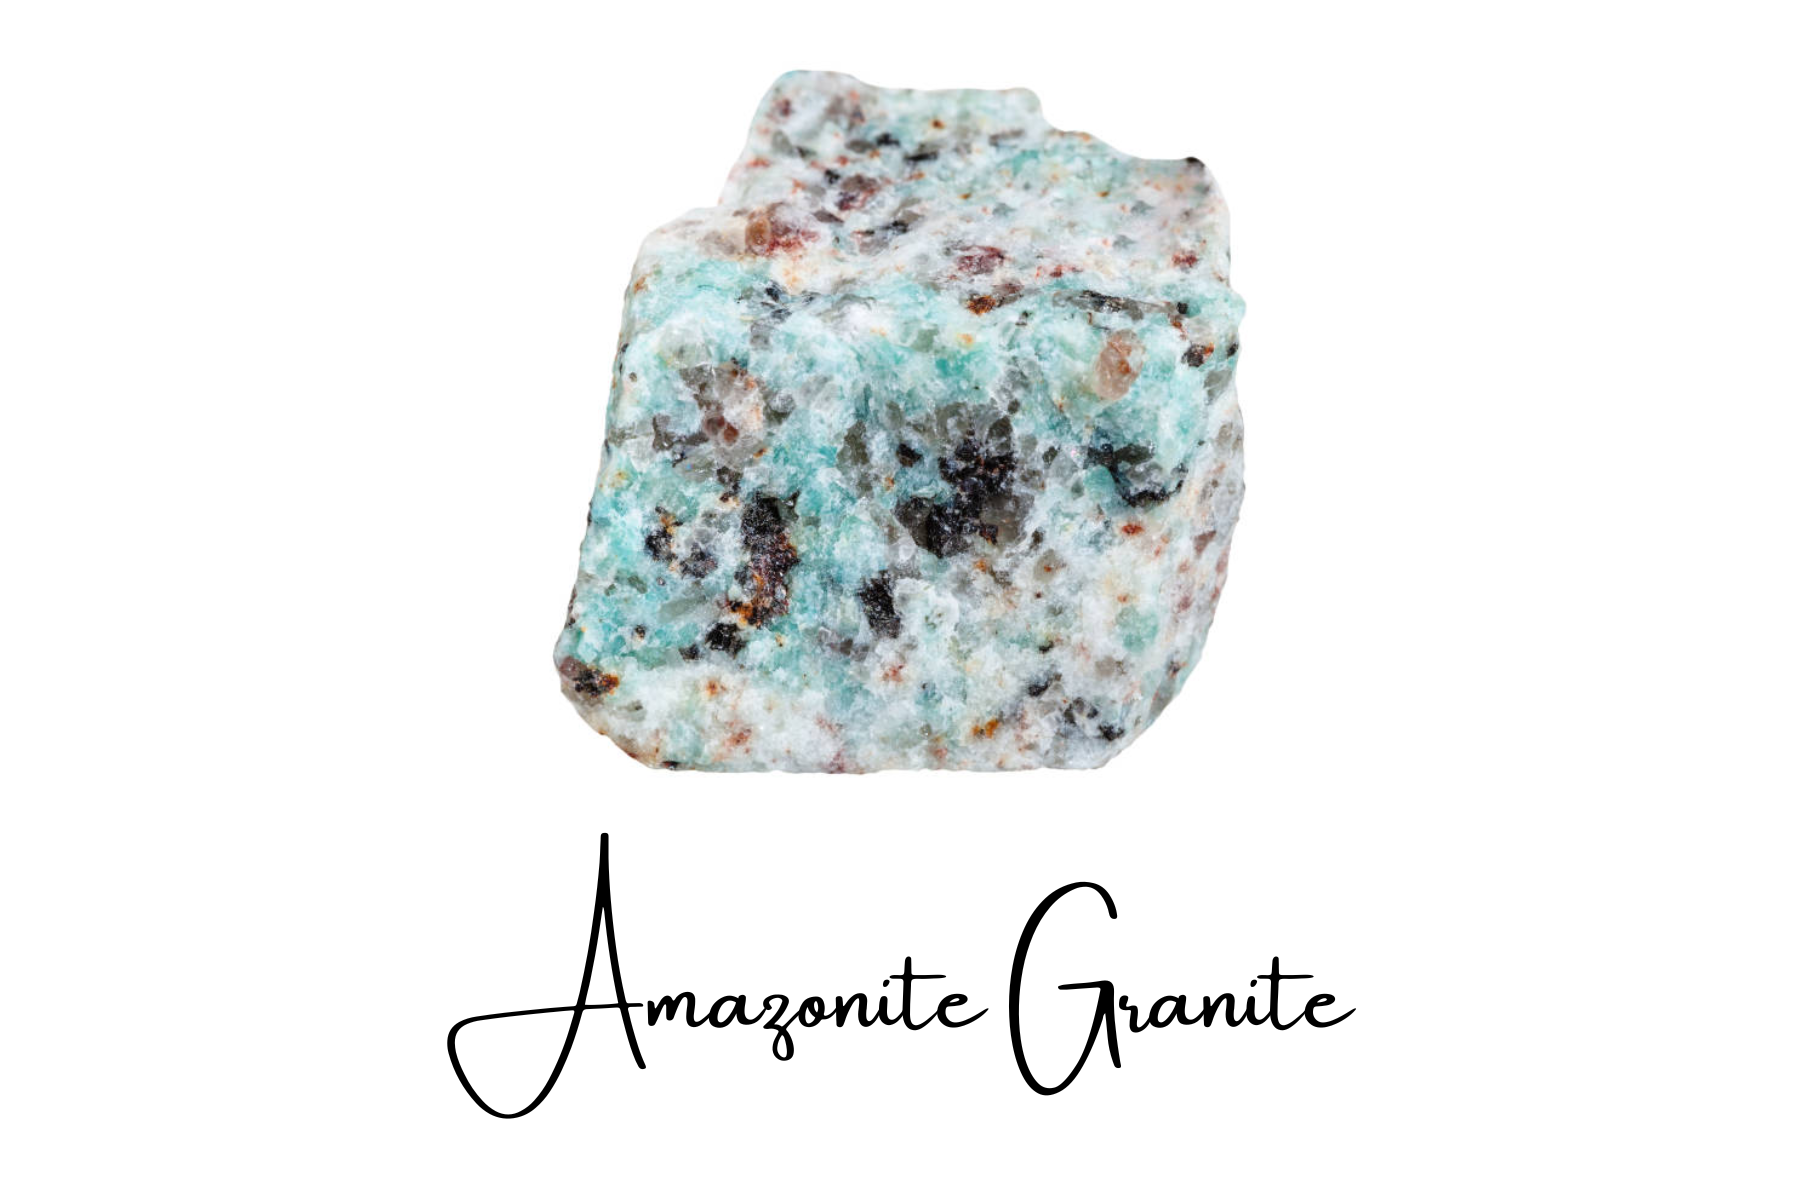 A square shaped smooth sky blue Amazonite granite